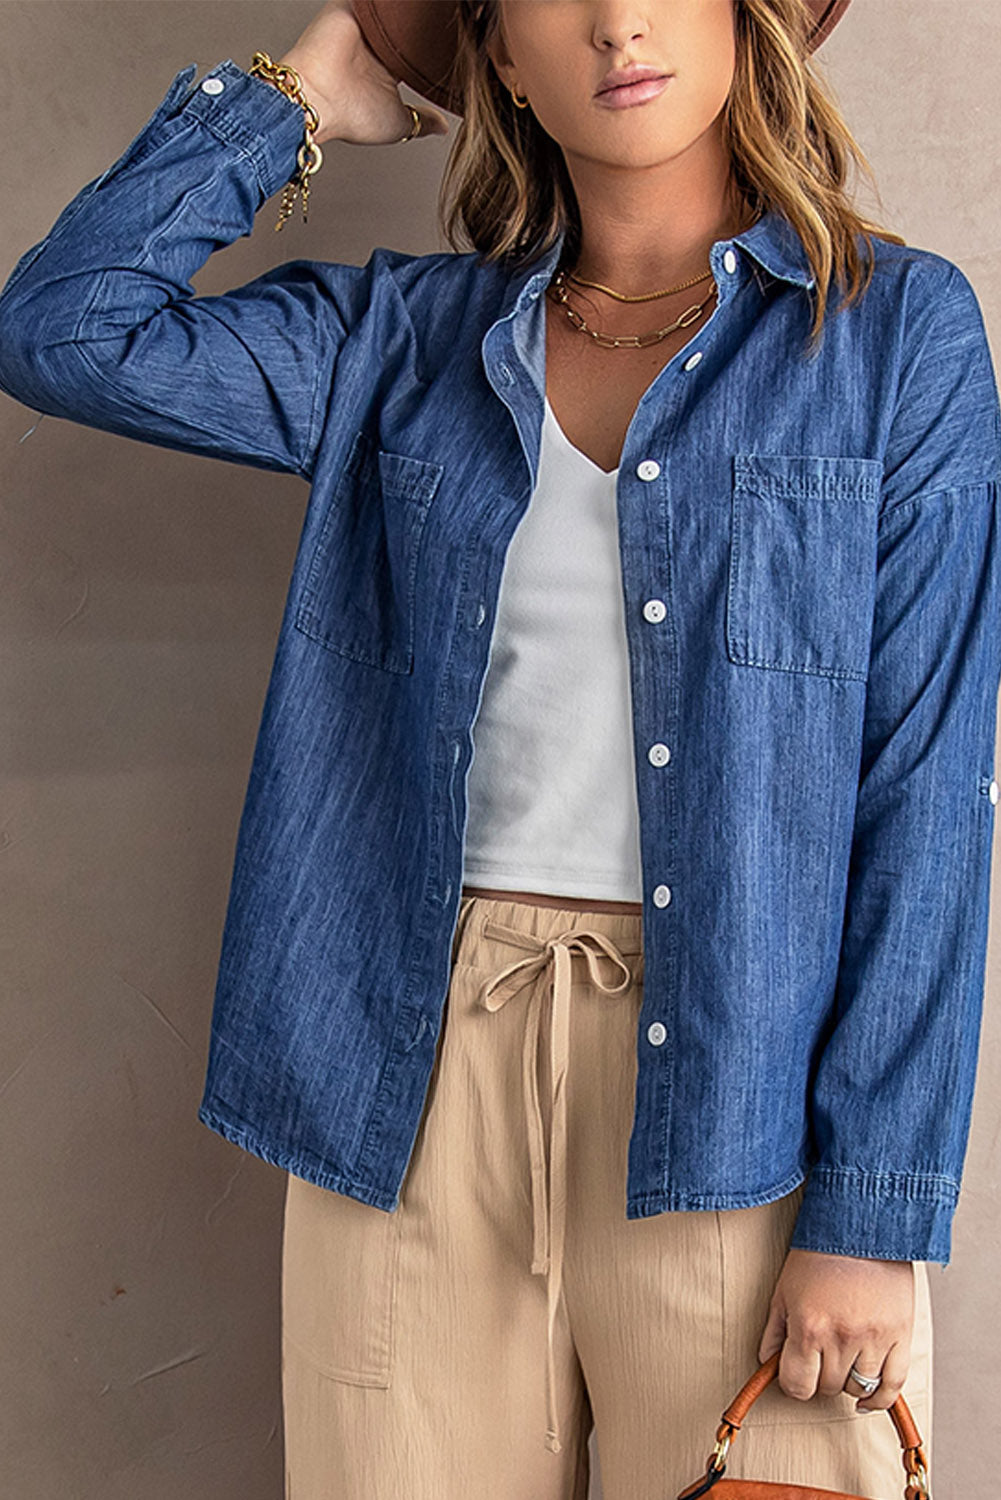 LC2551585-5-S, LC2551585-5-M, LC2551585-5-L, LC2551585-5-XL, LC2551585-5-2XL, Blue Womens Denim Jacket Button Down Long Sleeve Shirts Blouses Tops